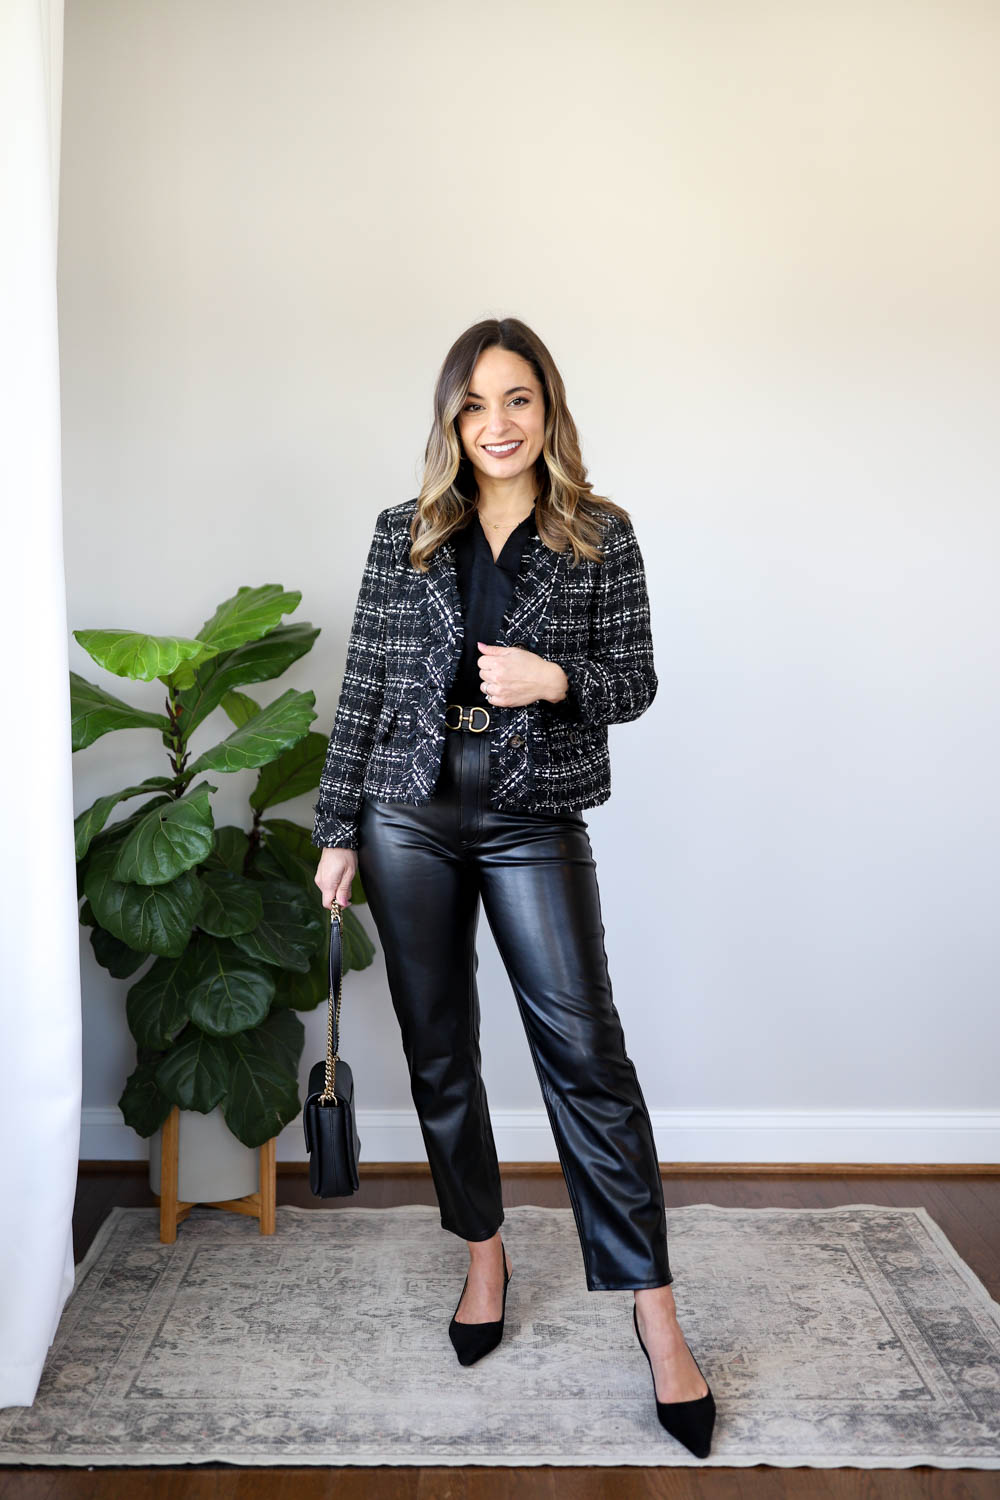 HOW TO STYLE LEATHER LEGGINS + WHAT TO WEAR WITH LEATHER LEGGINGS